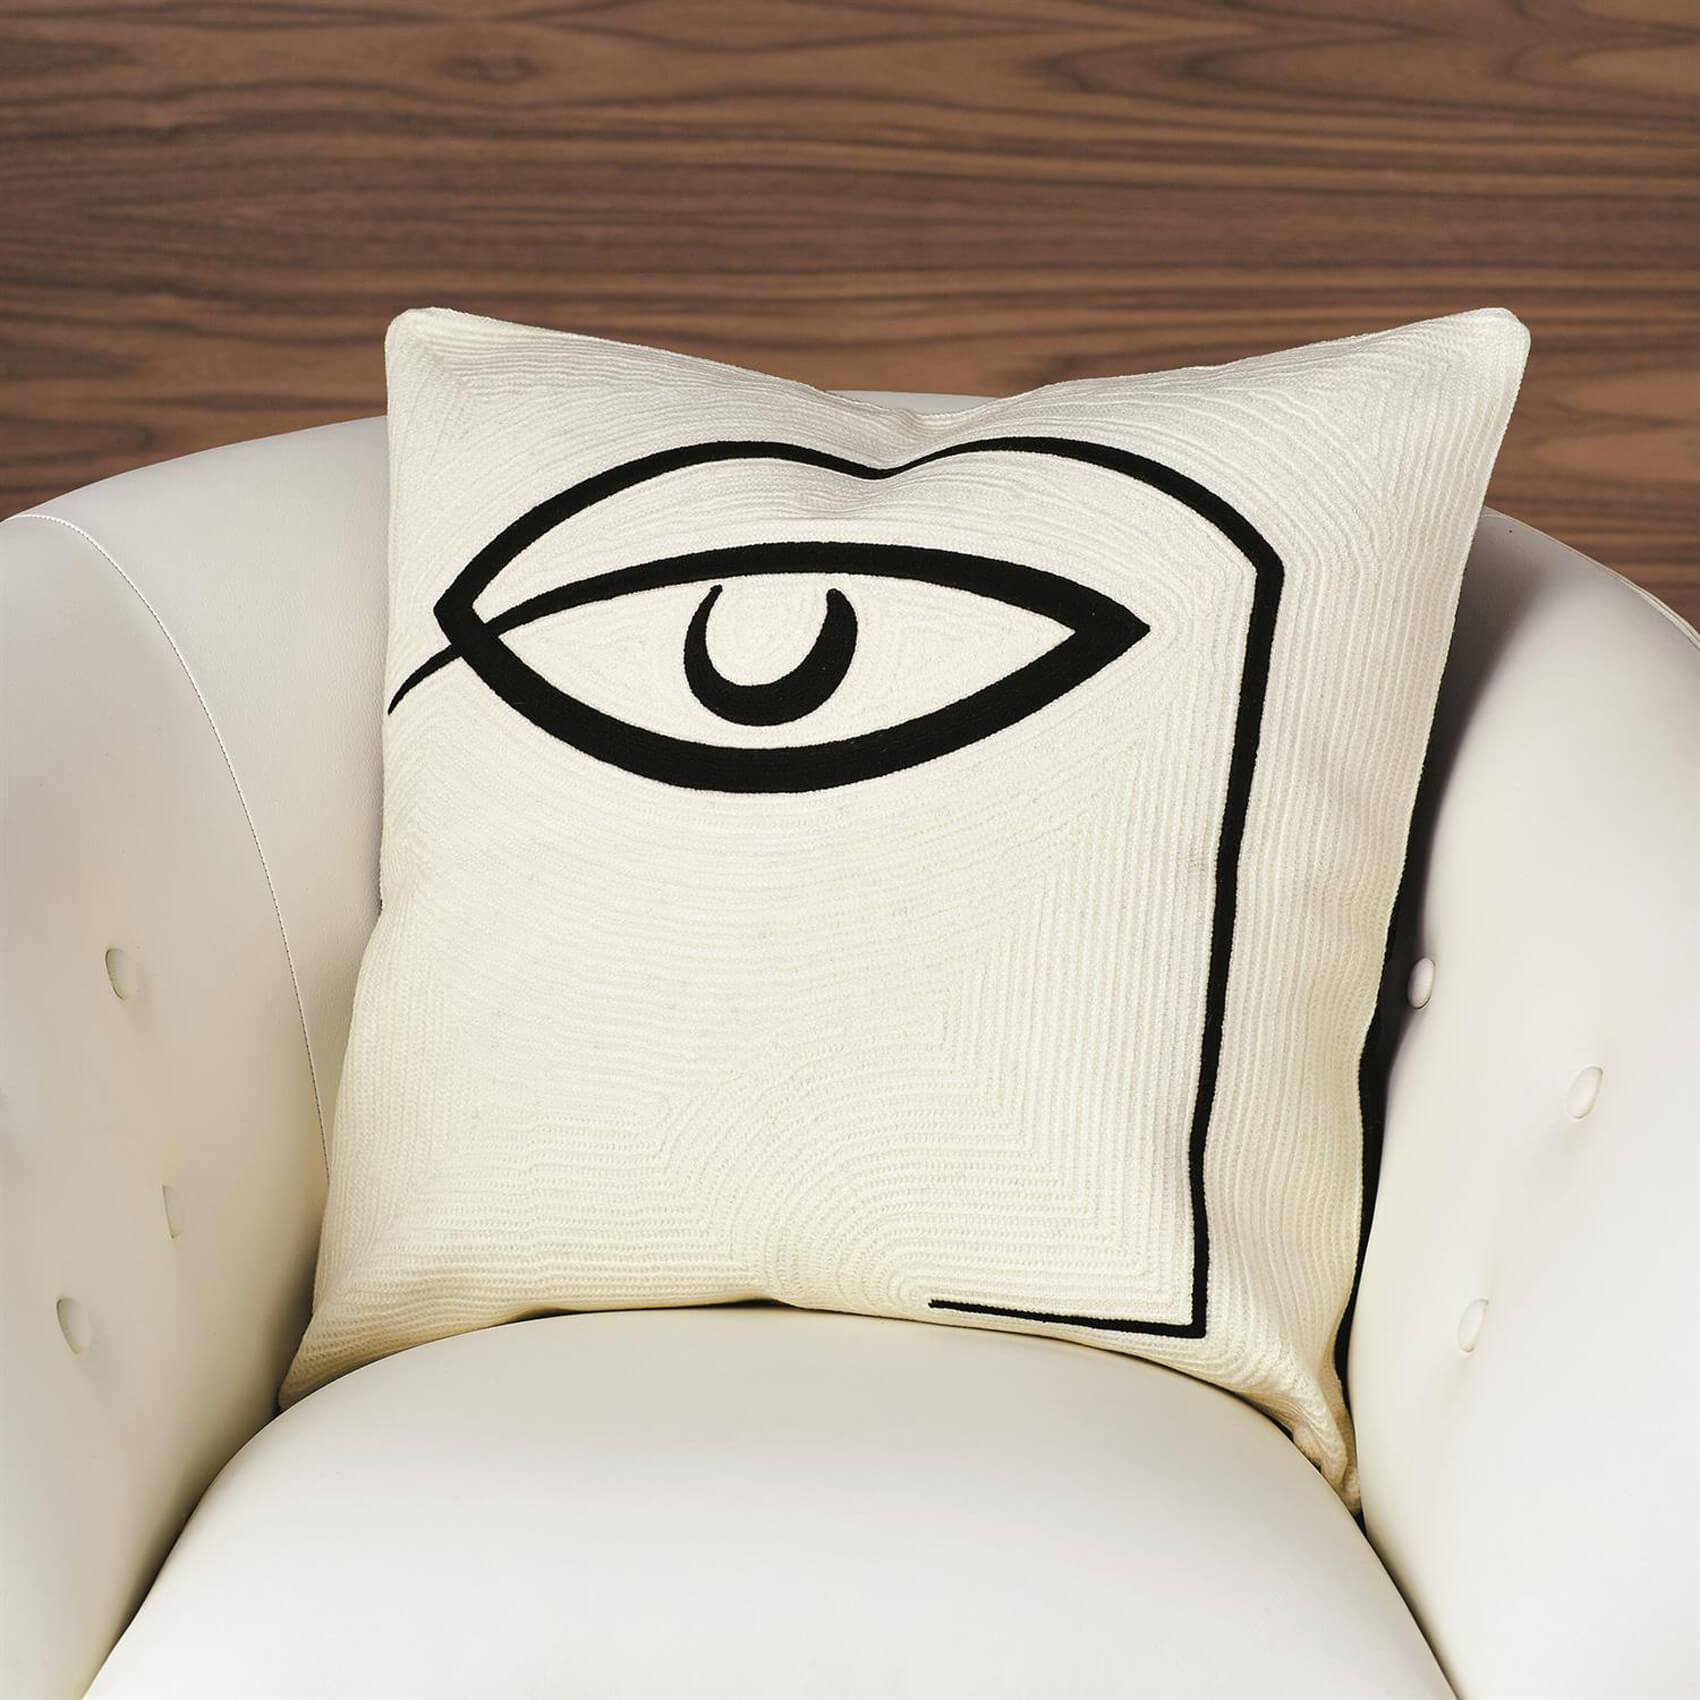 Image of Horus PIllow, Black and White Reversible